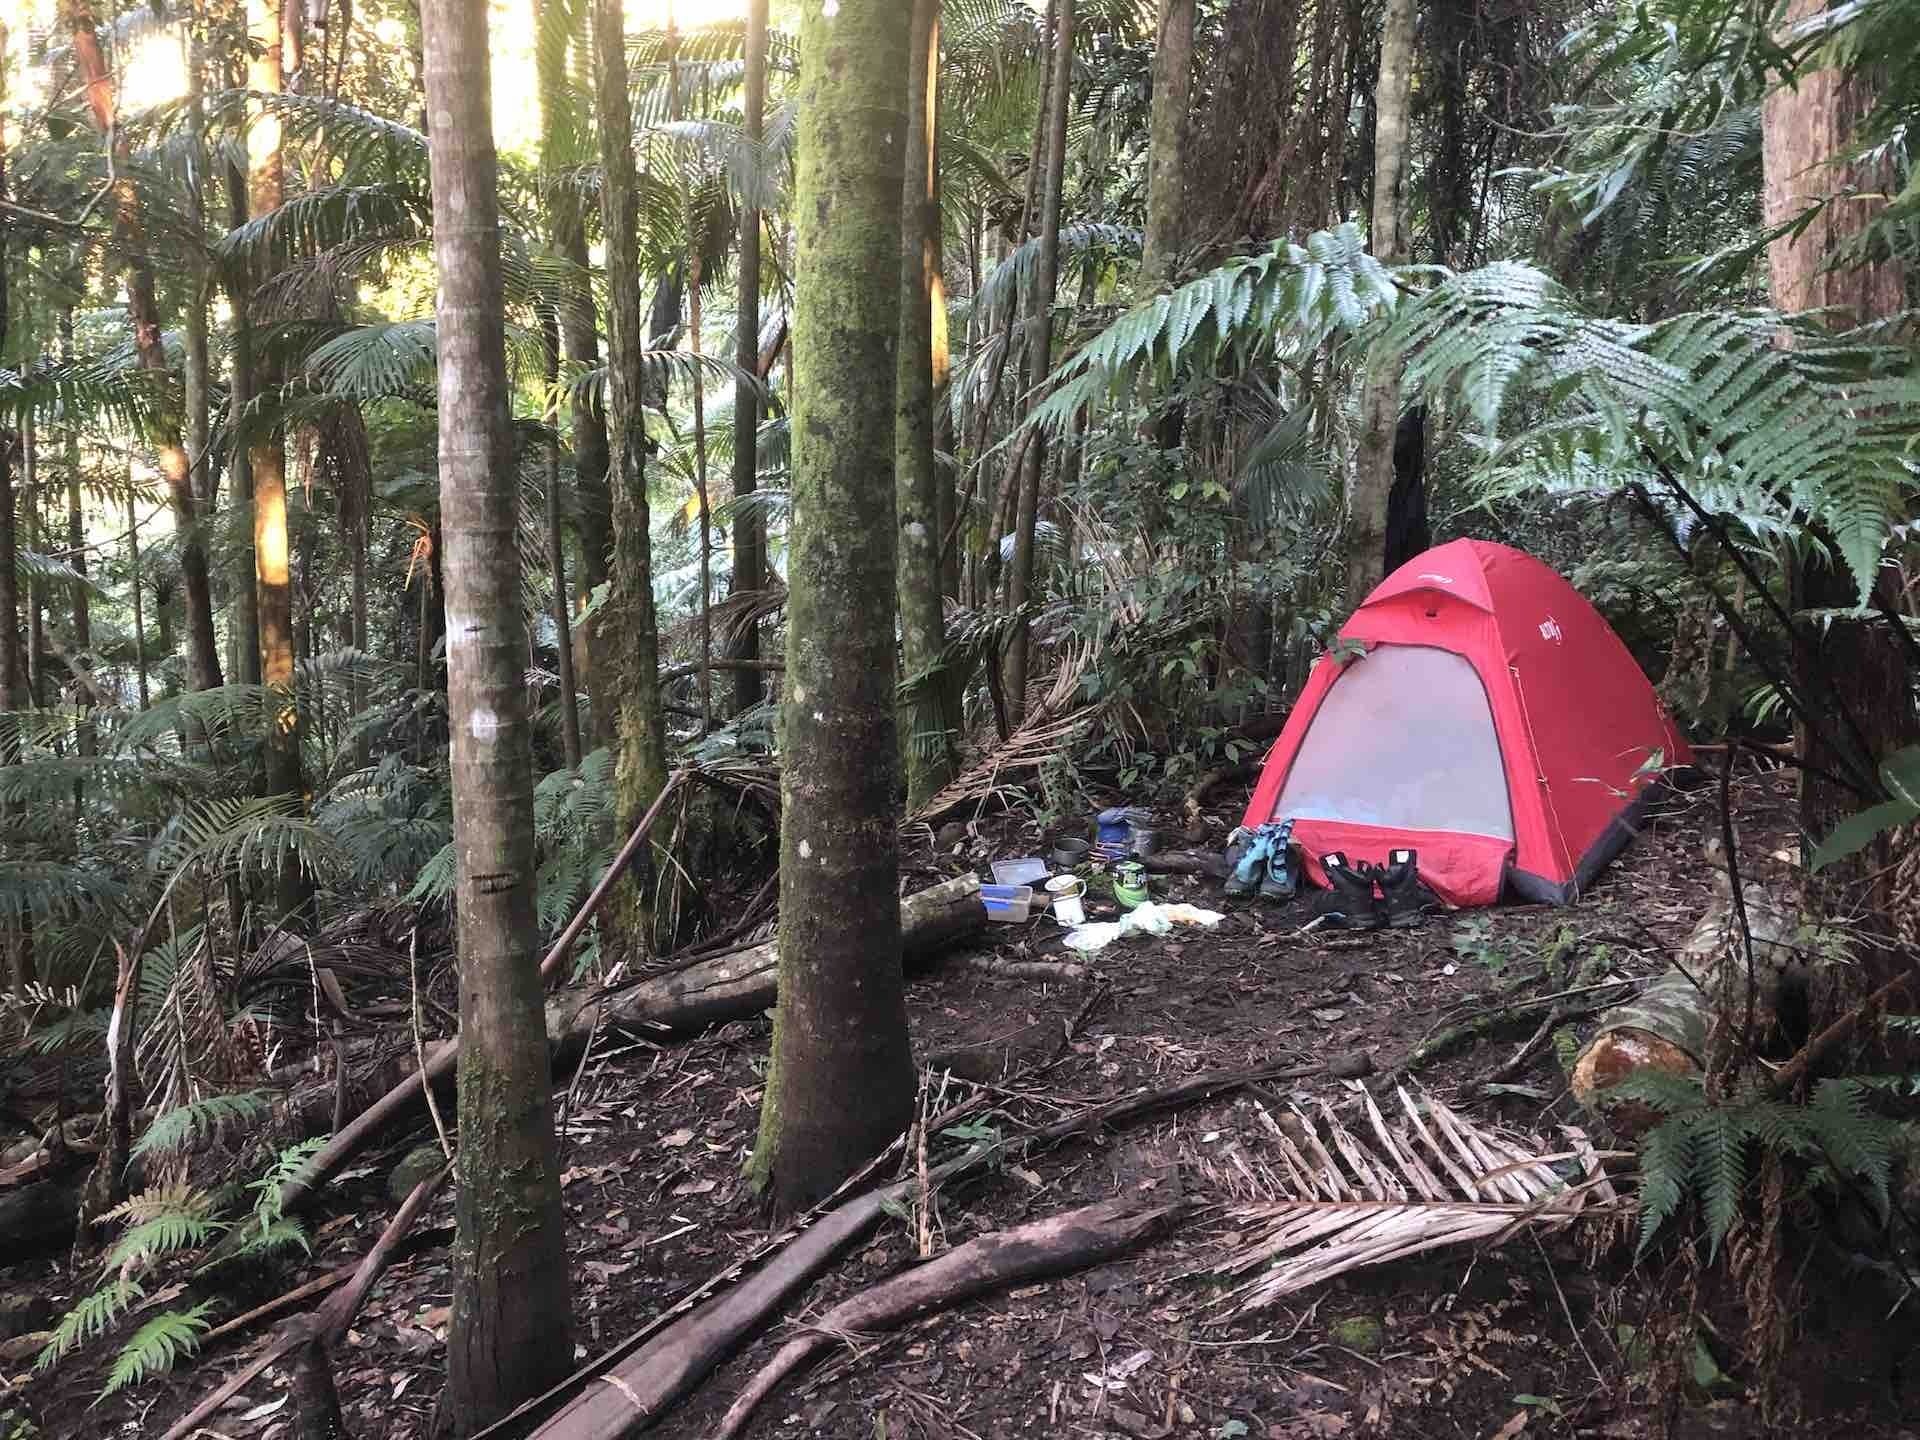 Off The Beaten (Historic Nightcap) Track – Byron Bay’s Best Hidden Hike, Alice Forrest, camping, tent, rainforest, palm